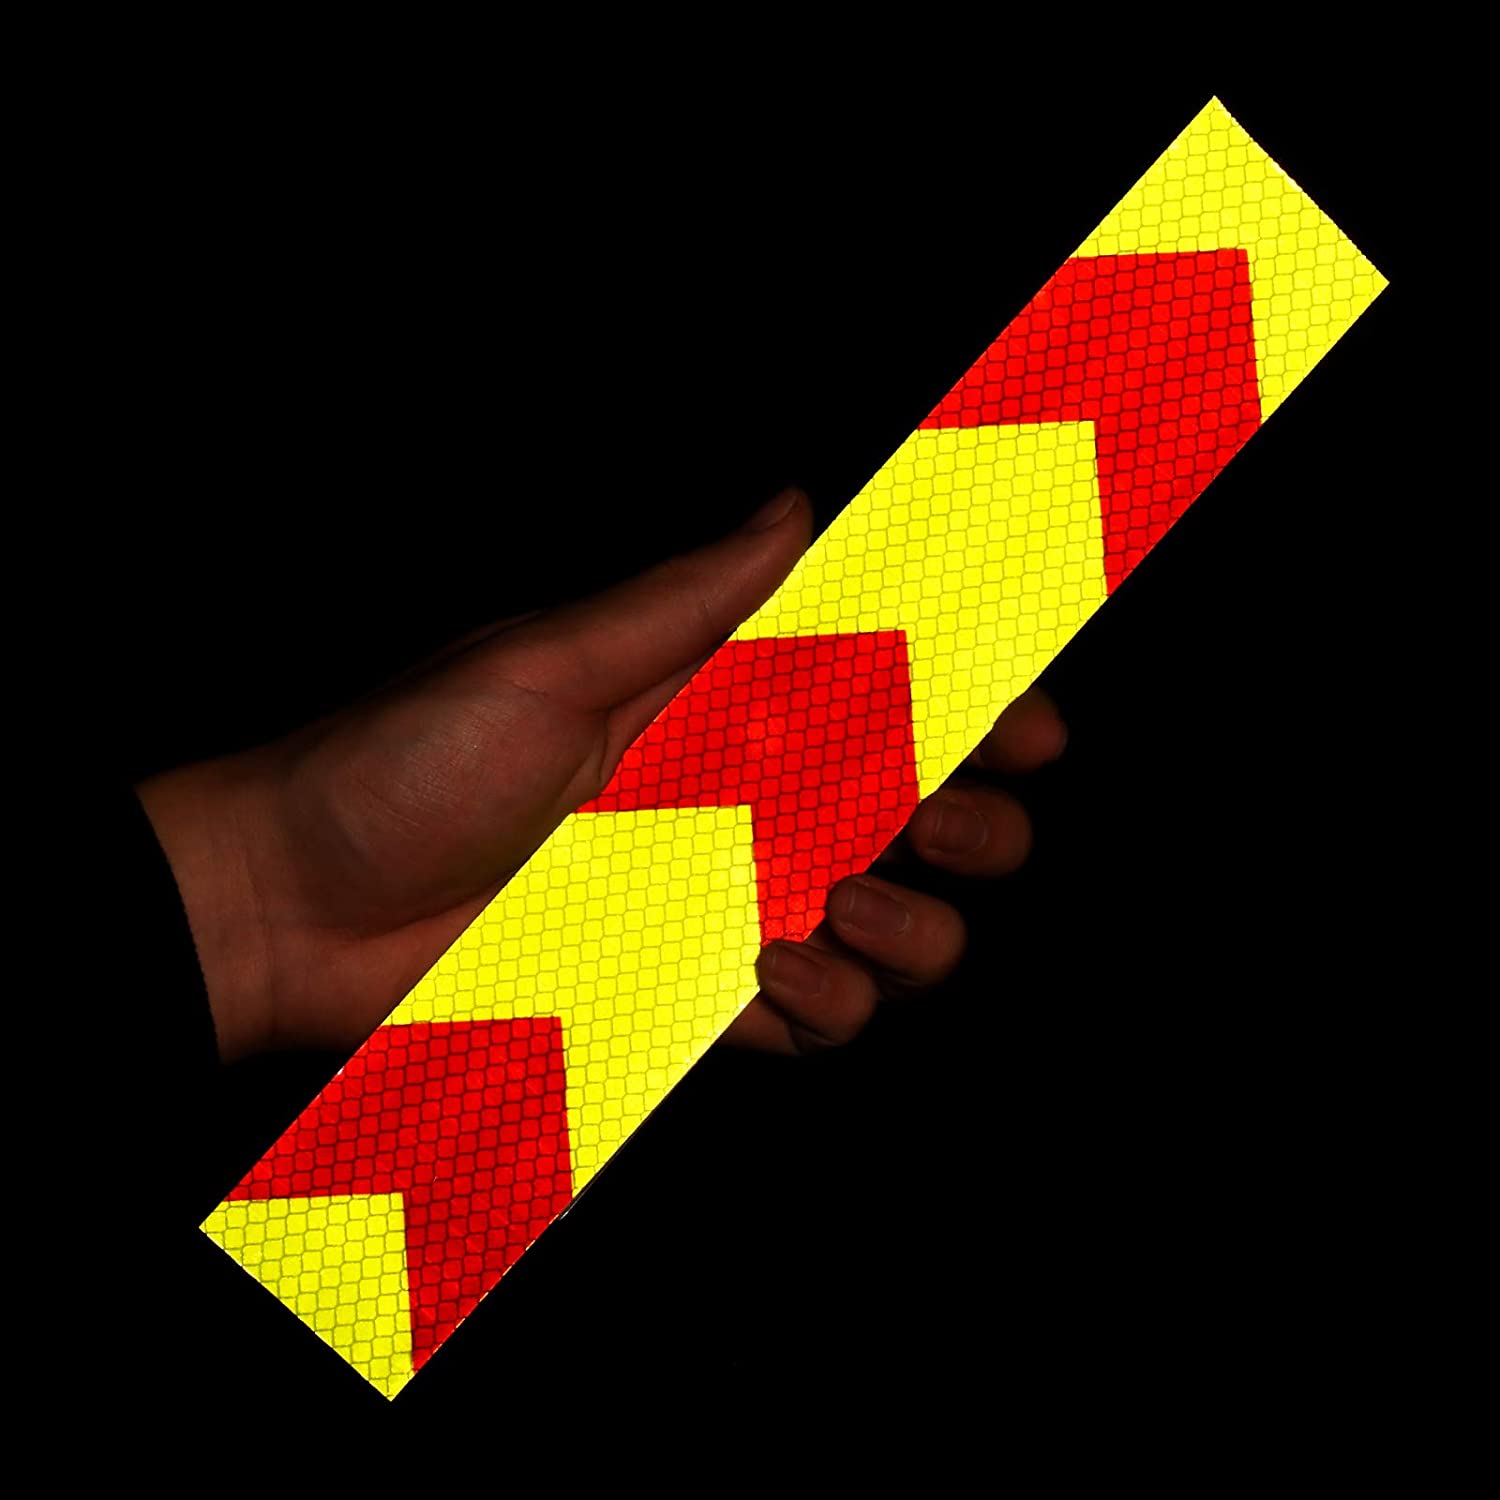 Conspicuity PET Micro-prismatic Arrow Reflective Safety Tape Vehicle Reflector Sticker